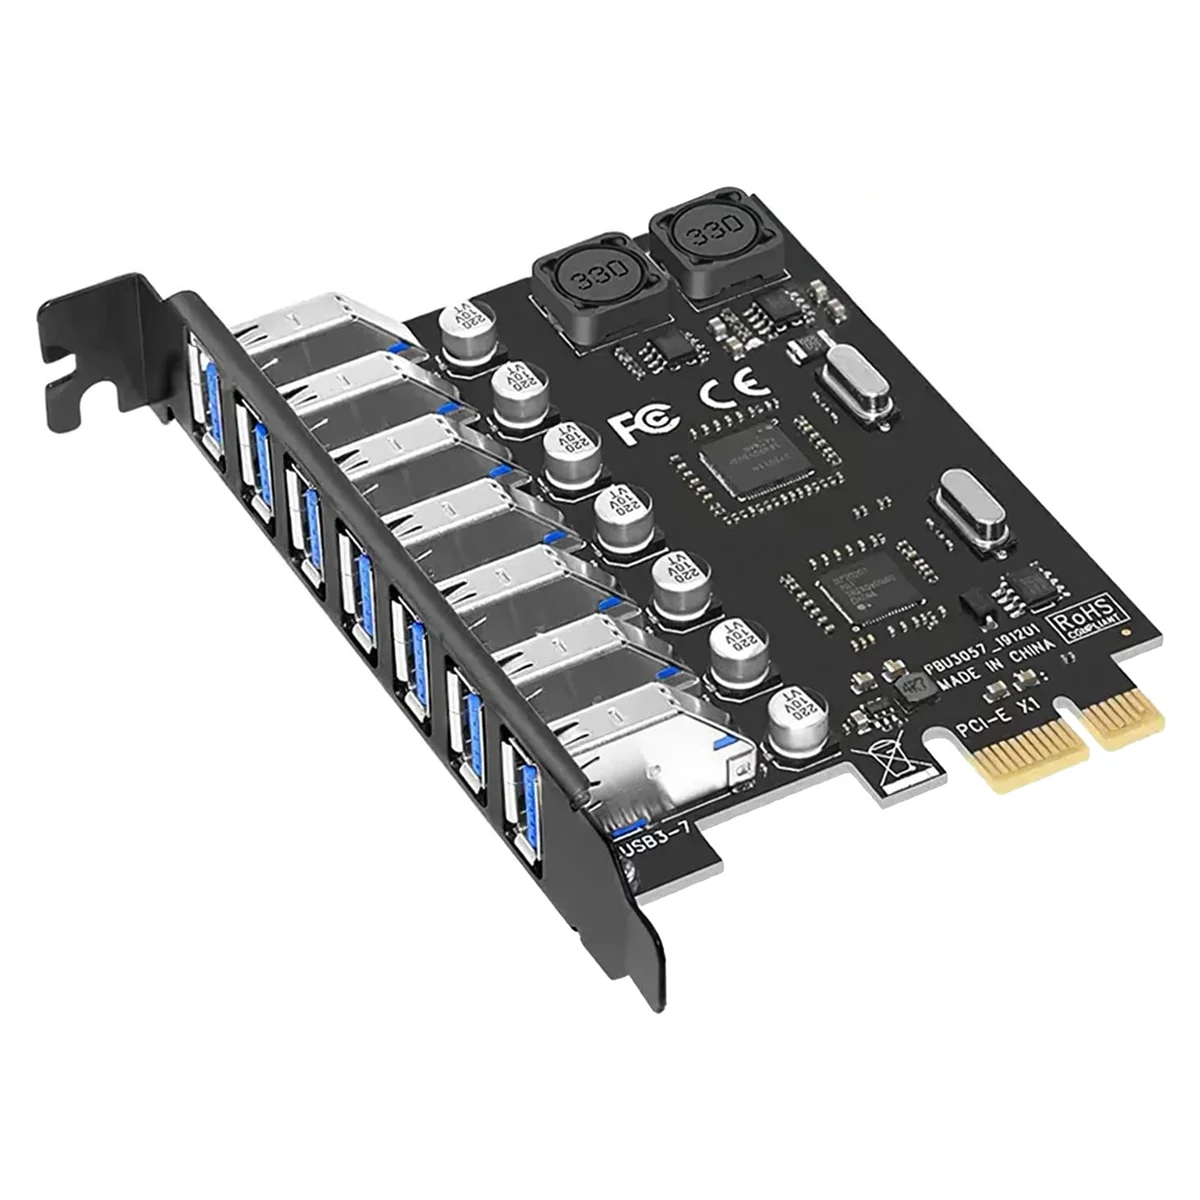 

7 Ports USB 3.0 PCI Adapter Card USB Expansion Card, PCIe Riser Card for PC, Linux / WindowsXP/ 7/ 8/ 8.1/ 10